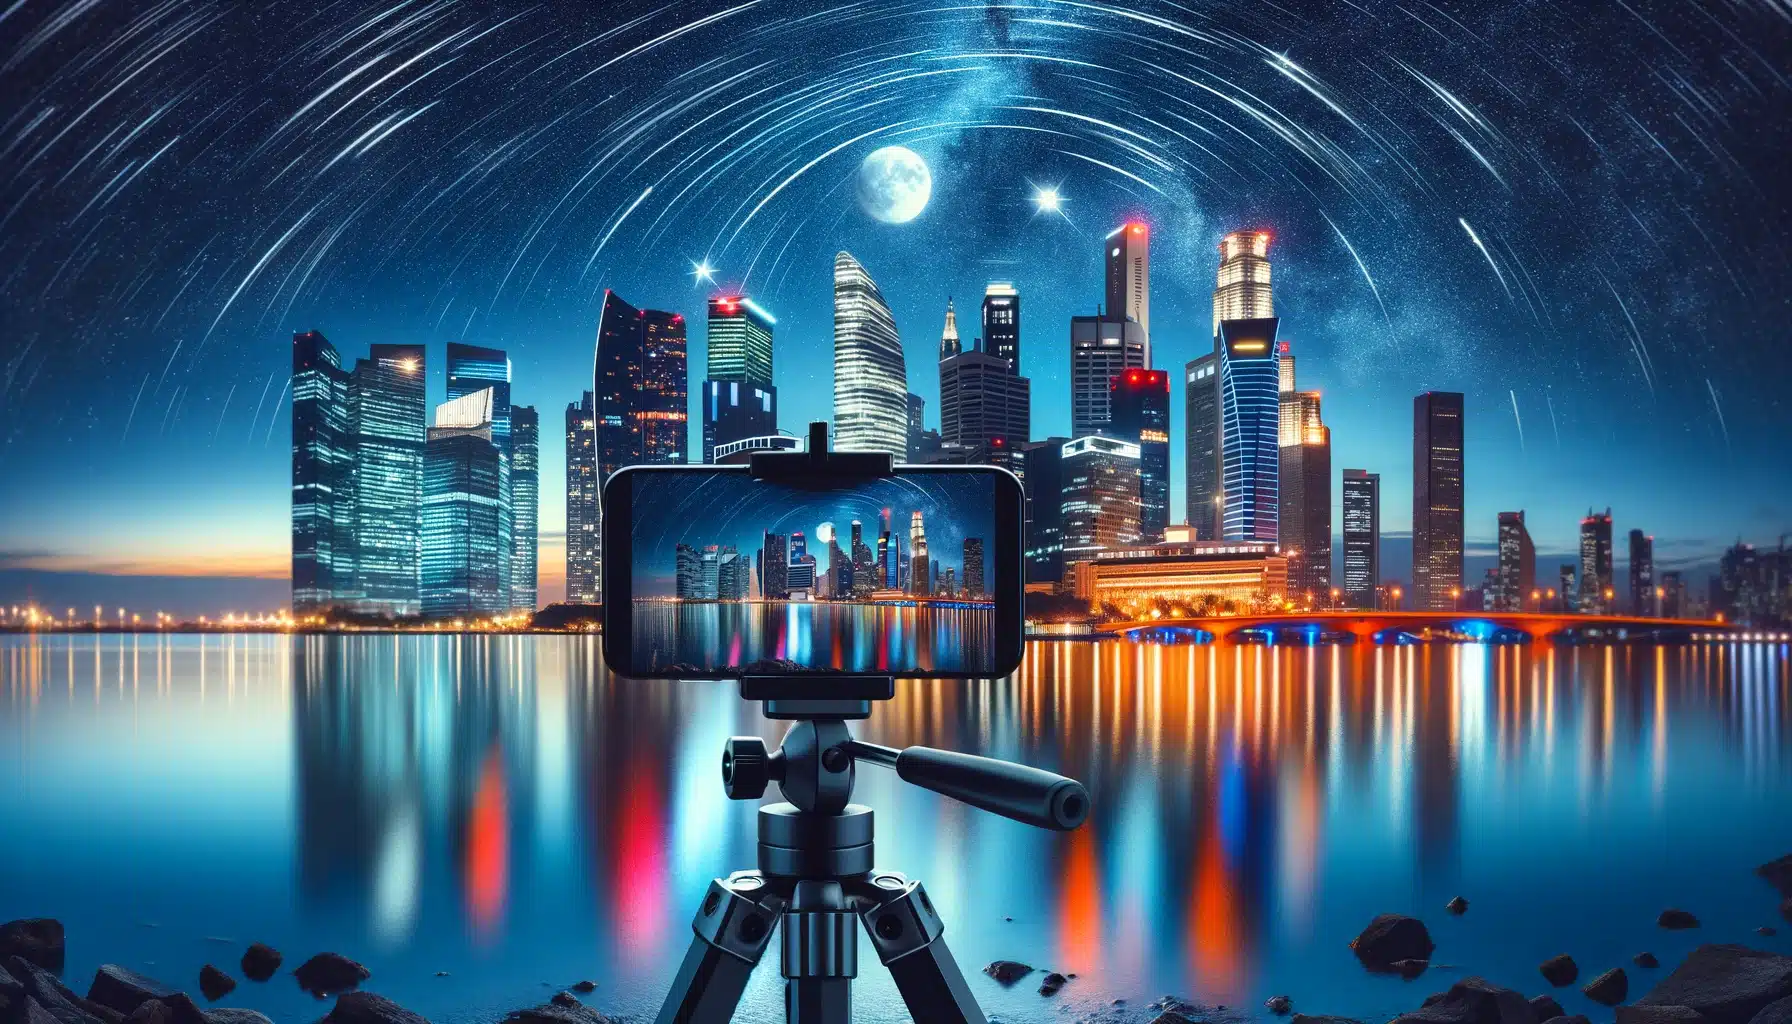 A person uses a smartphone on a tripod to capture a vibrant cityscape at night, with star trails and smooth water reflections.